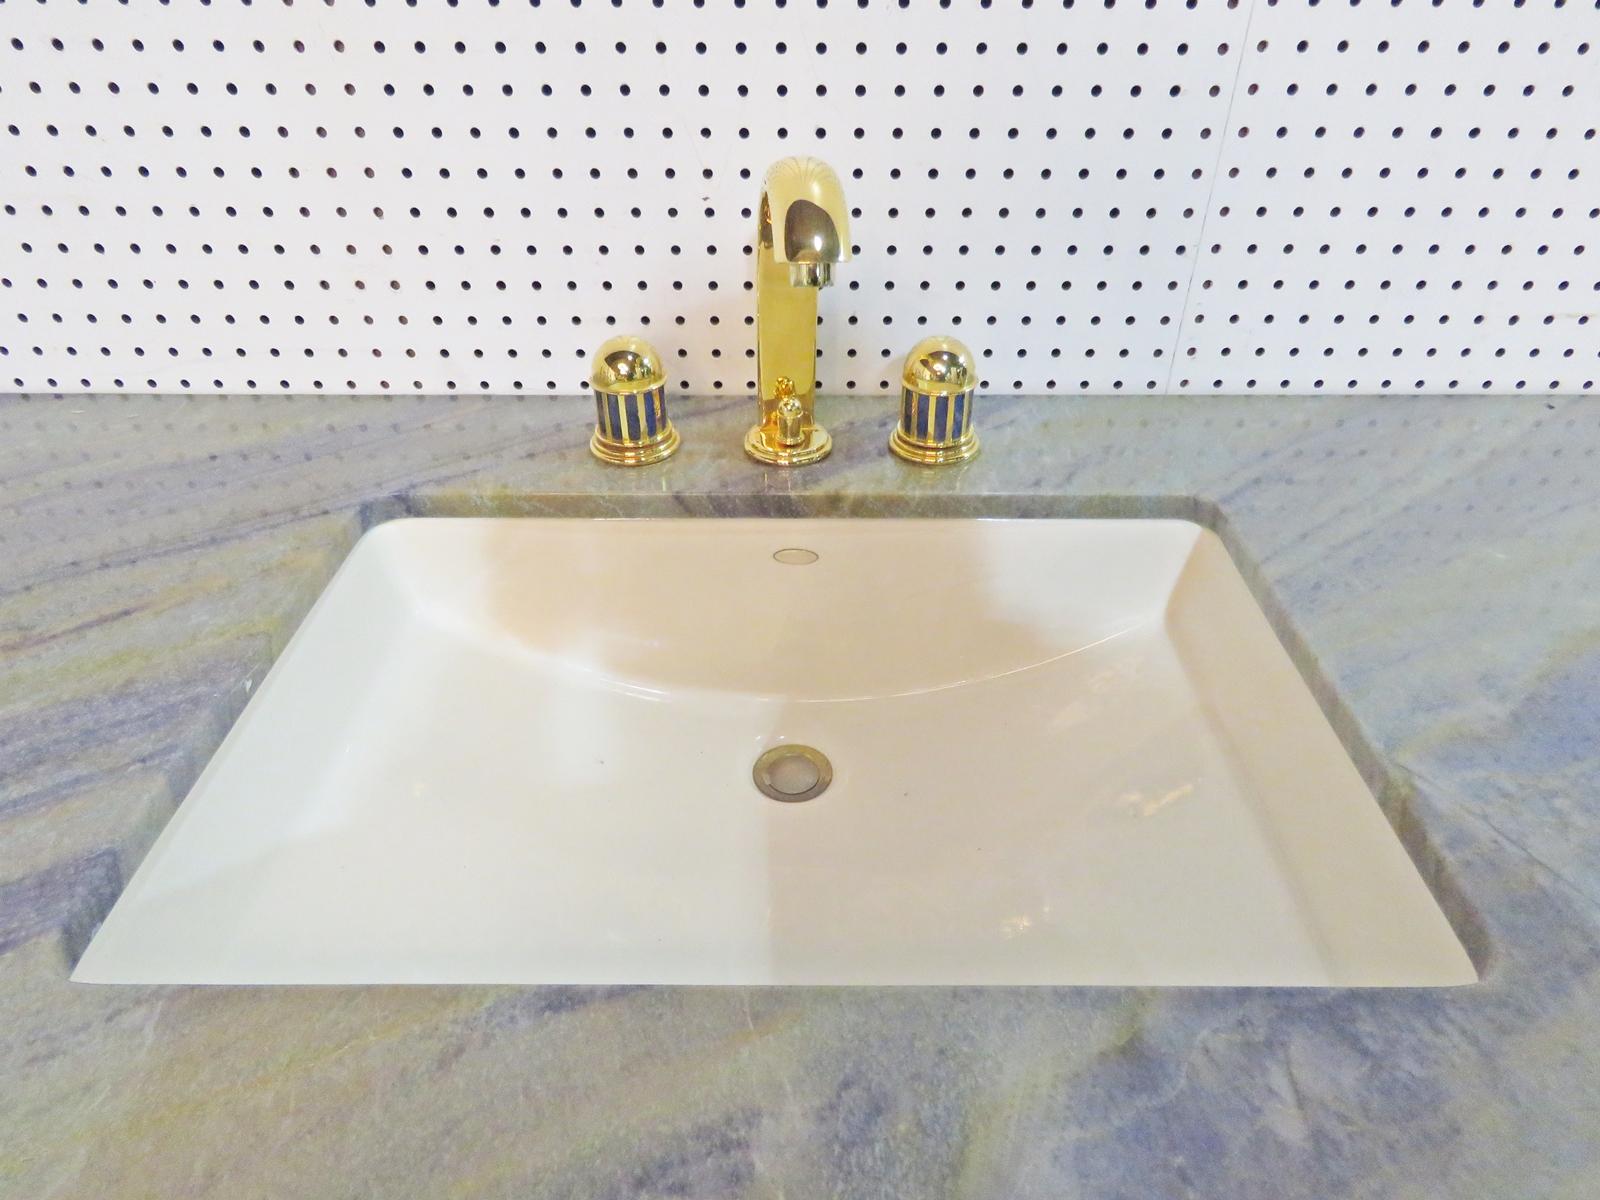 Late 20th Century Unique Inlaid Neoclassical Style Sink Vanity with Marble Top Lapis Faucet